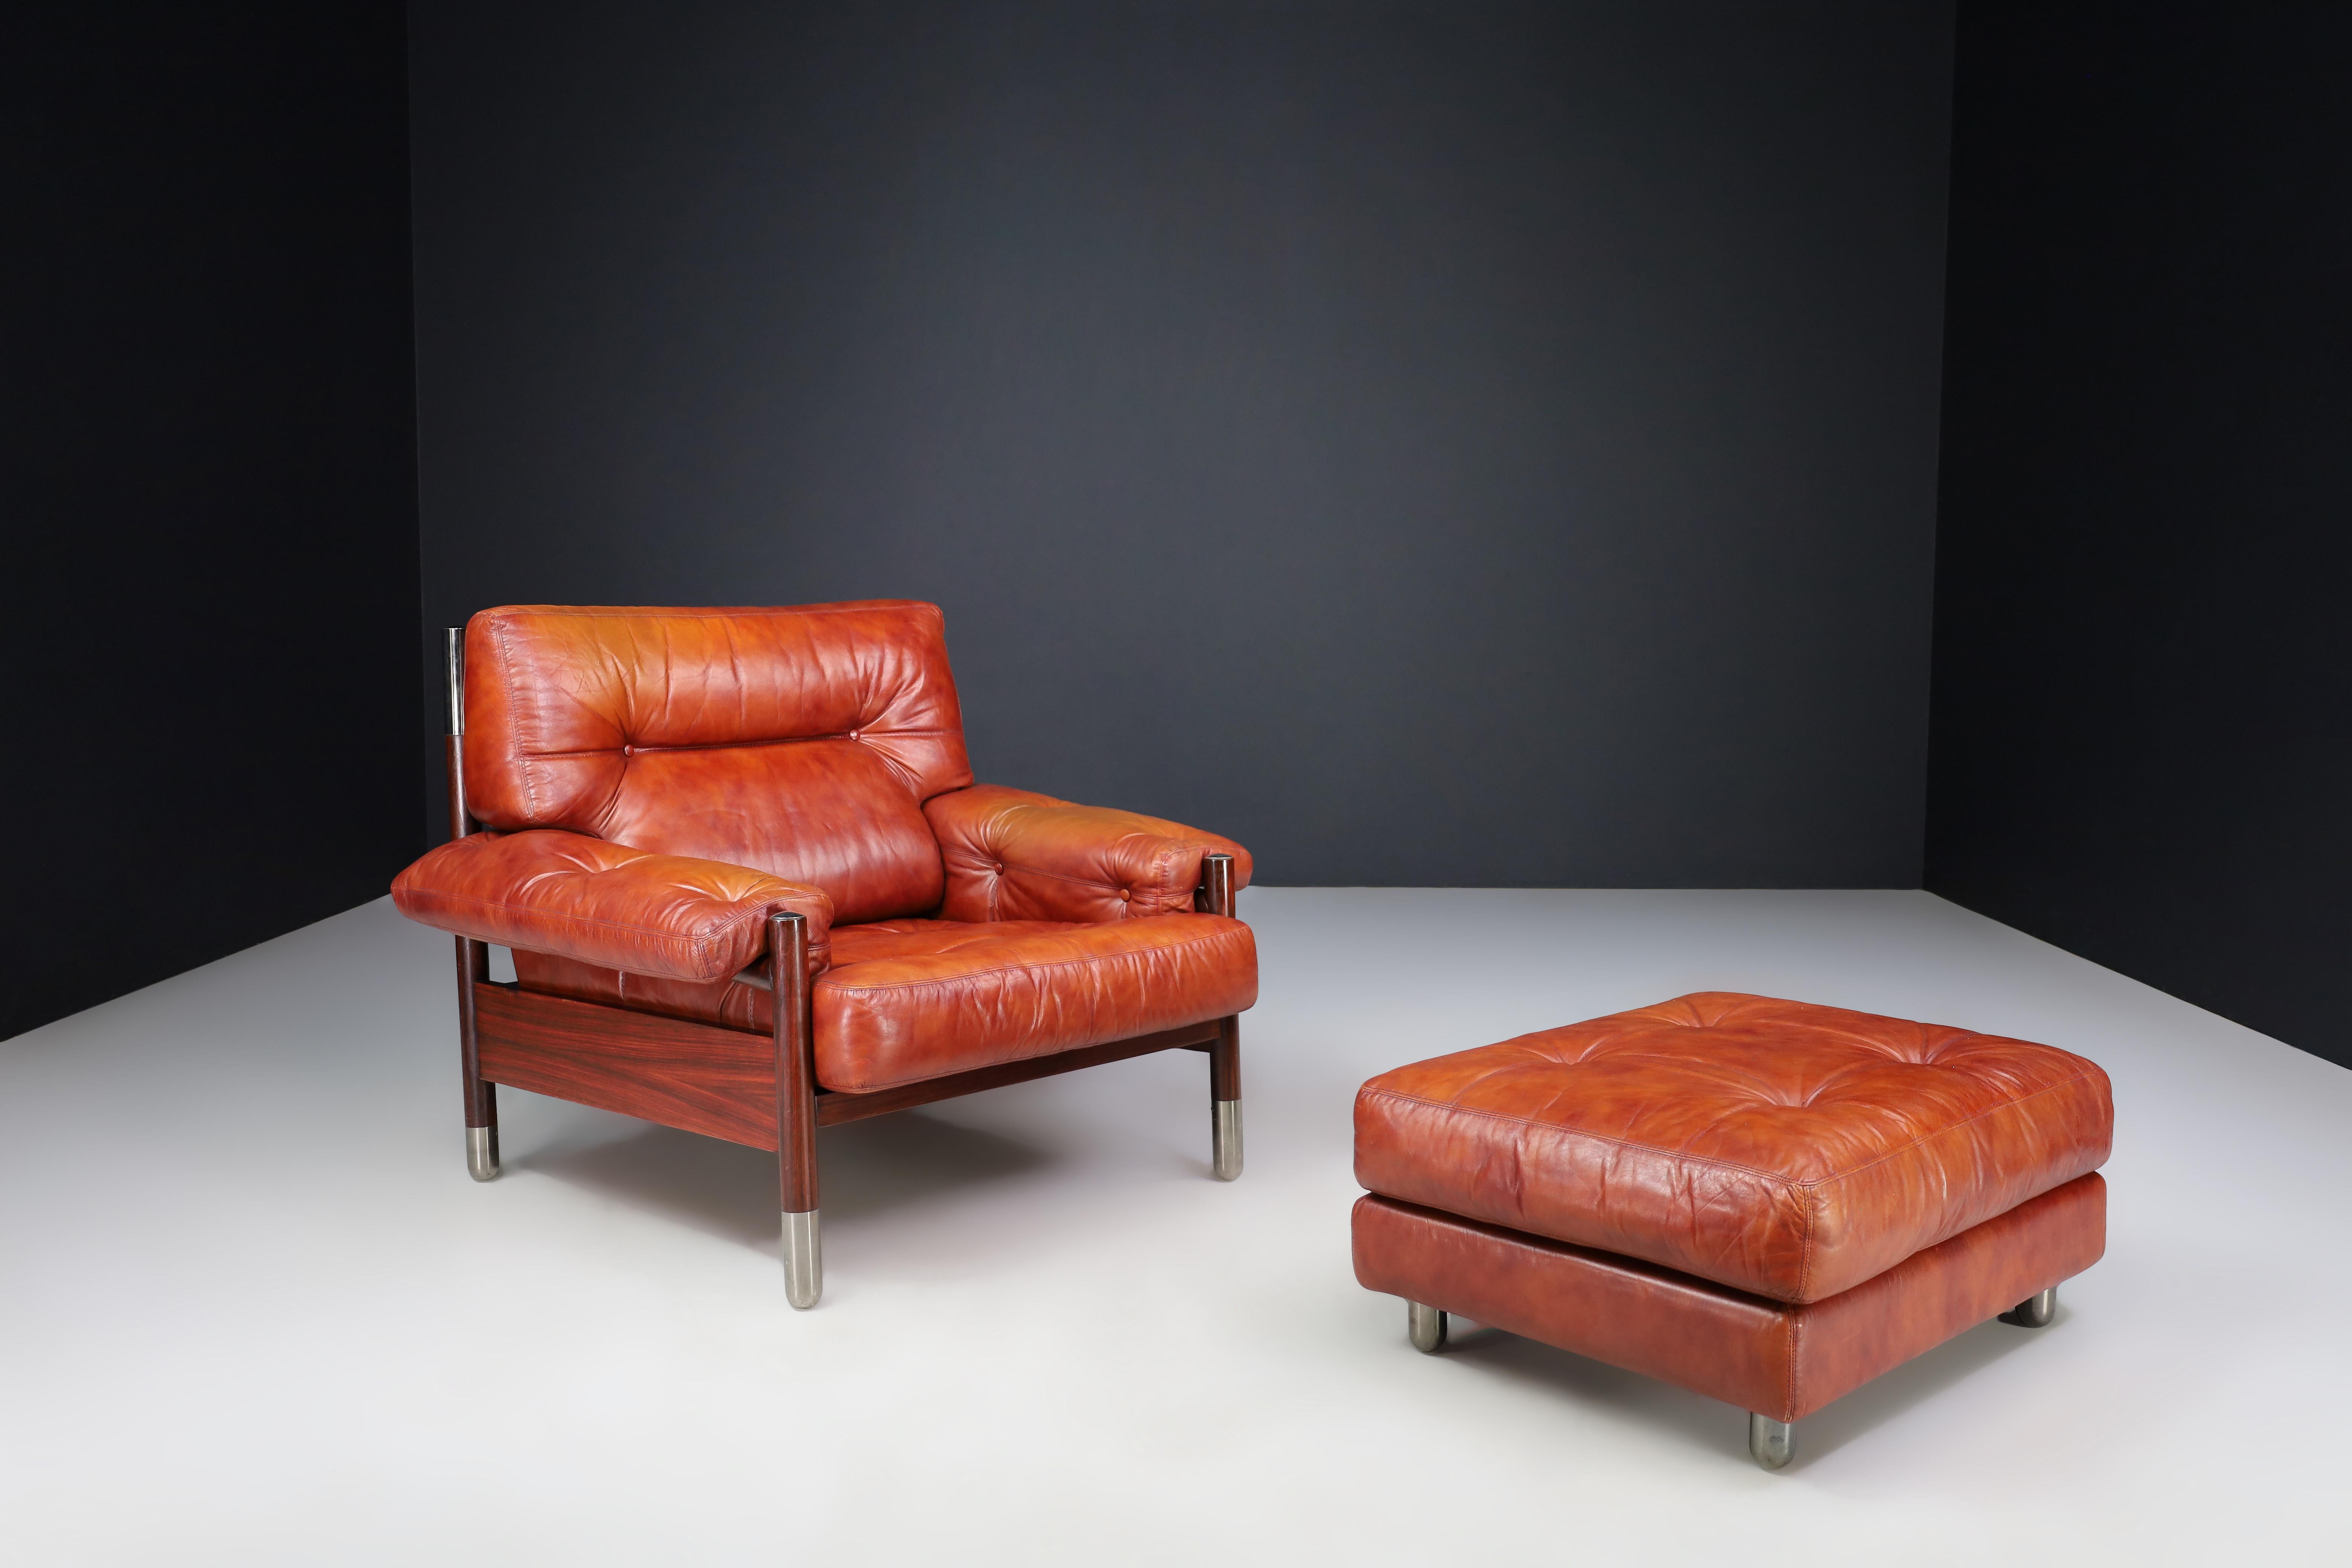 Carlo de Carli Leather lounge chair and ottoman, Italy 1970s

Carlo de Carli designed a lounge chair with an ottoman made of leather and walnut for Sormani in Italy during the 1960s. This elegant and stylish lounge chair and ottoman set, designed in